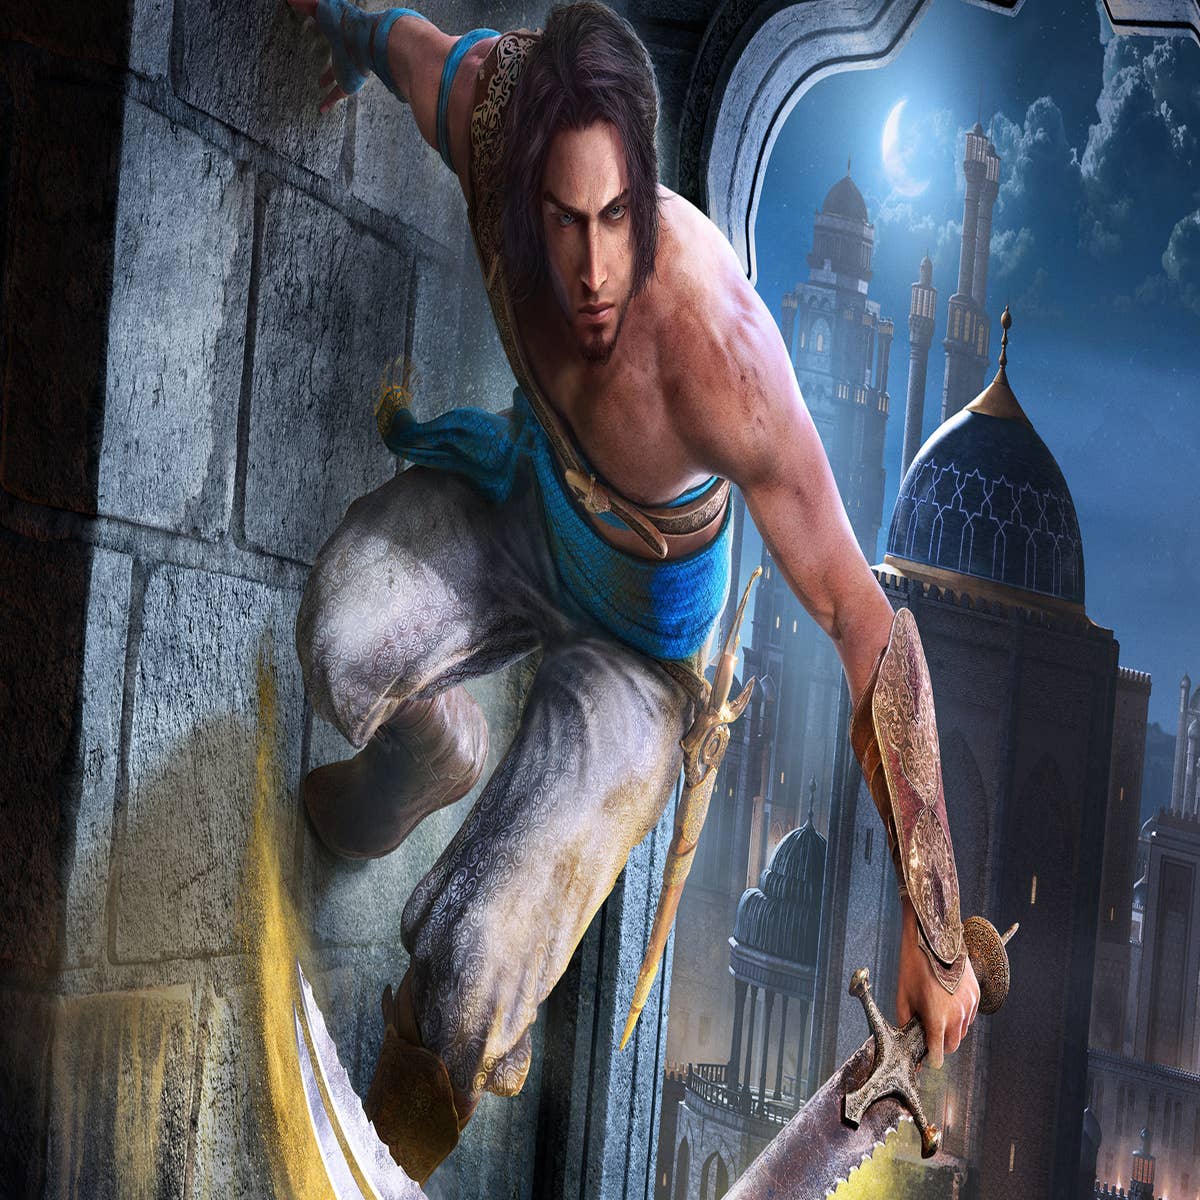 Prince of Persia: The Sands of Time Remake Switch Box Art Appears